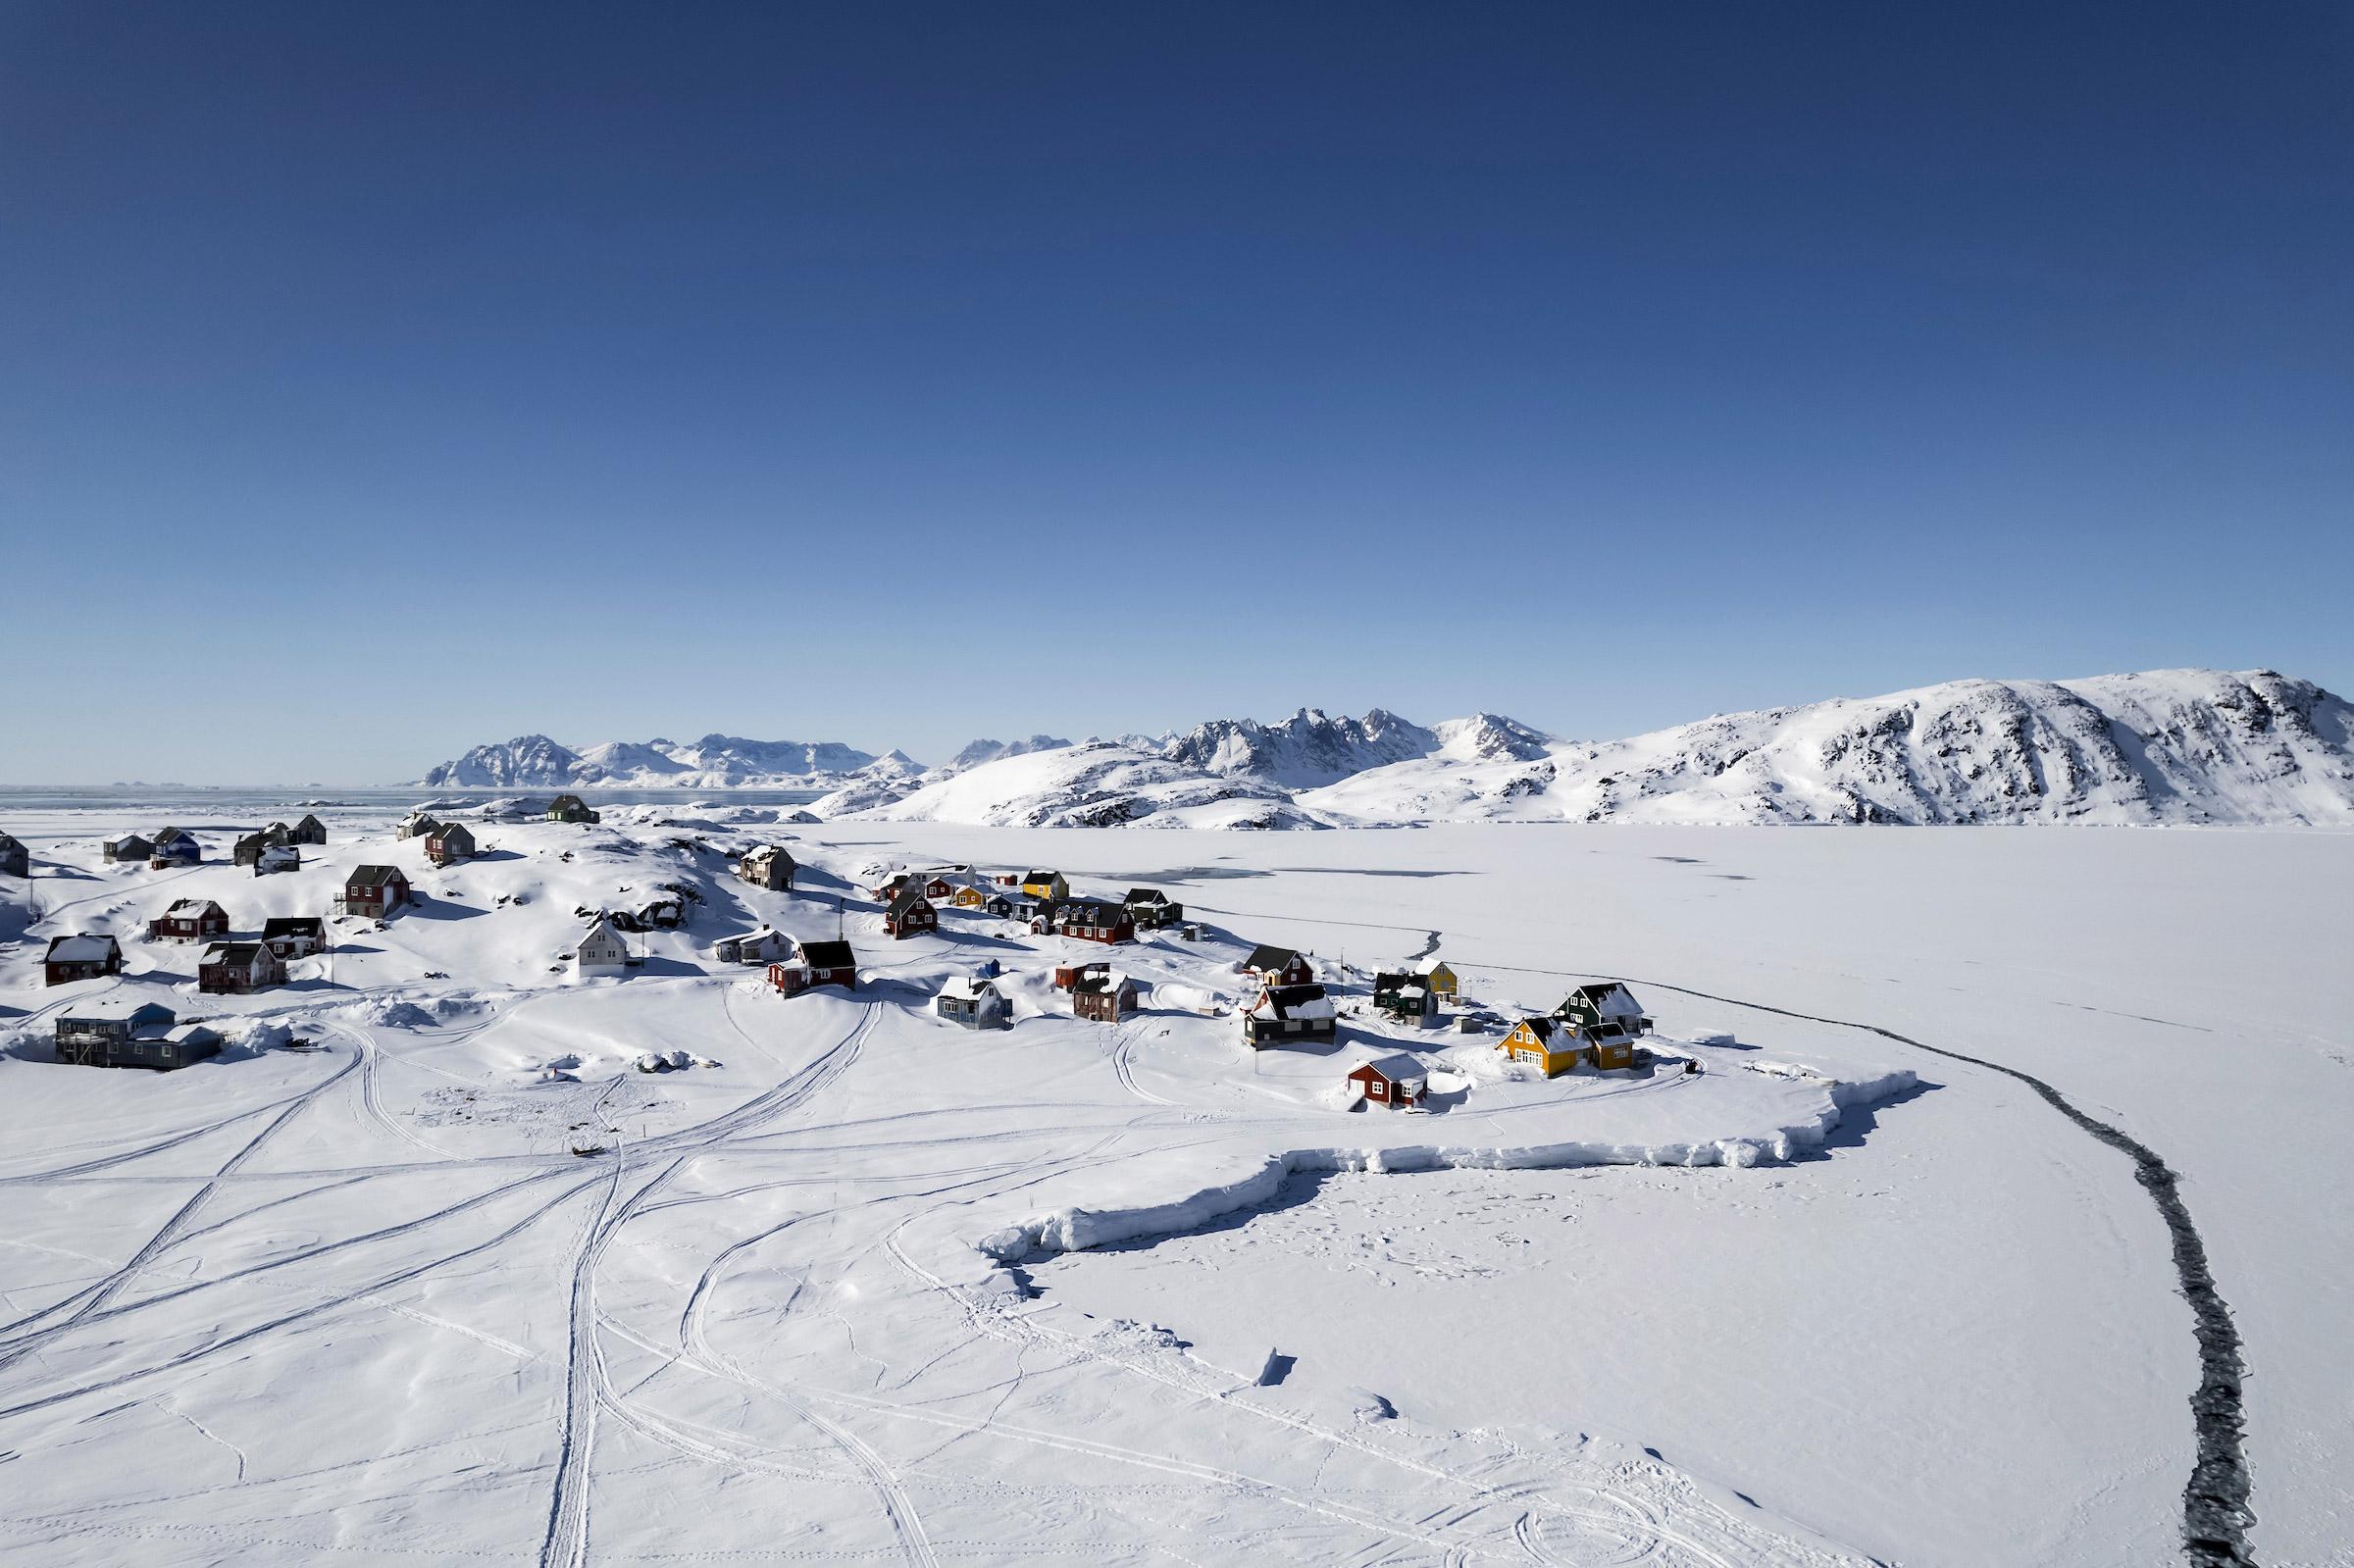 Kulusuk settlement in the winter. East Greenland. Photo by Aningaaq Rosing Carlsen - Visit Greenland